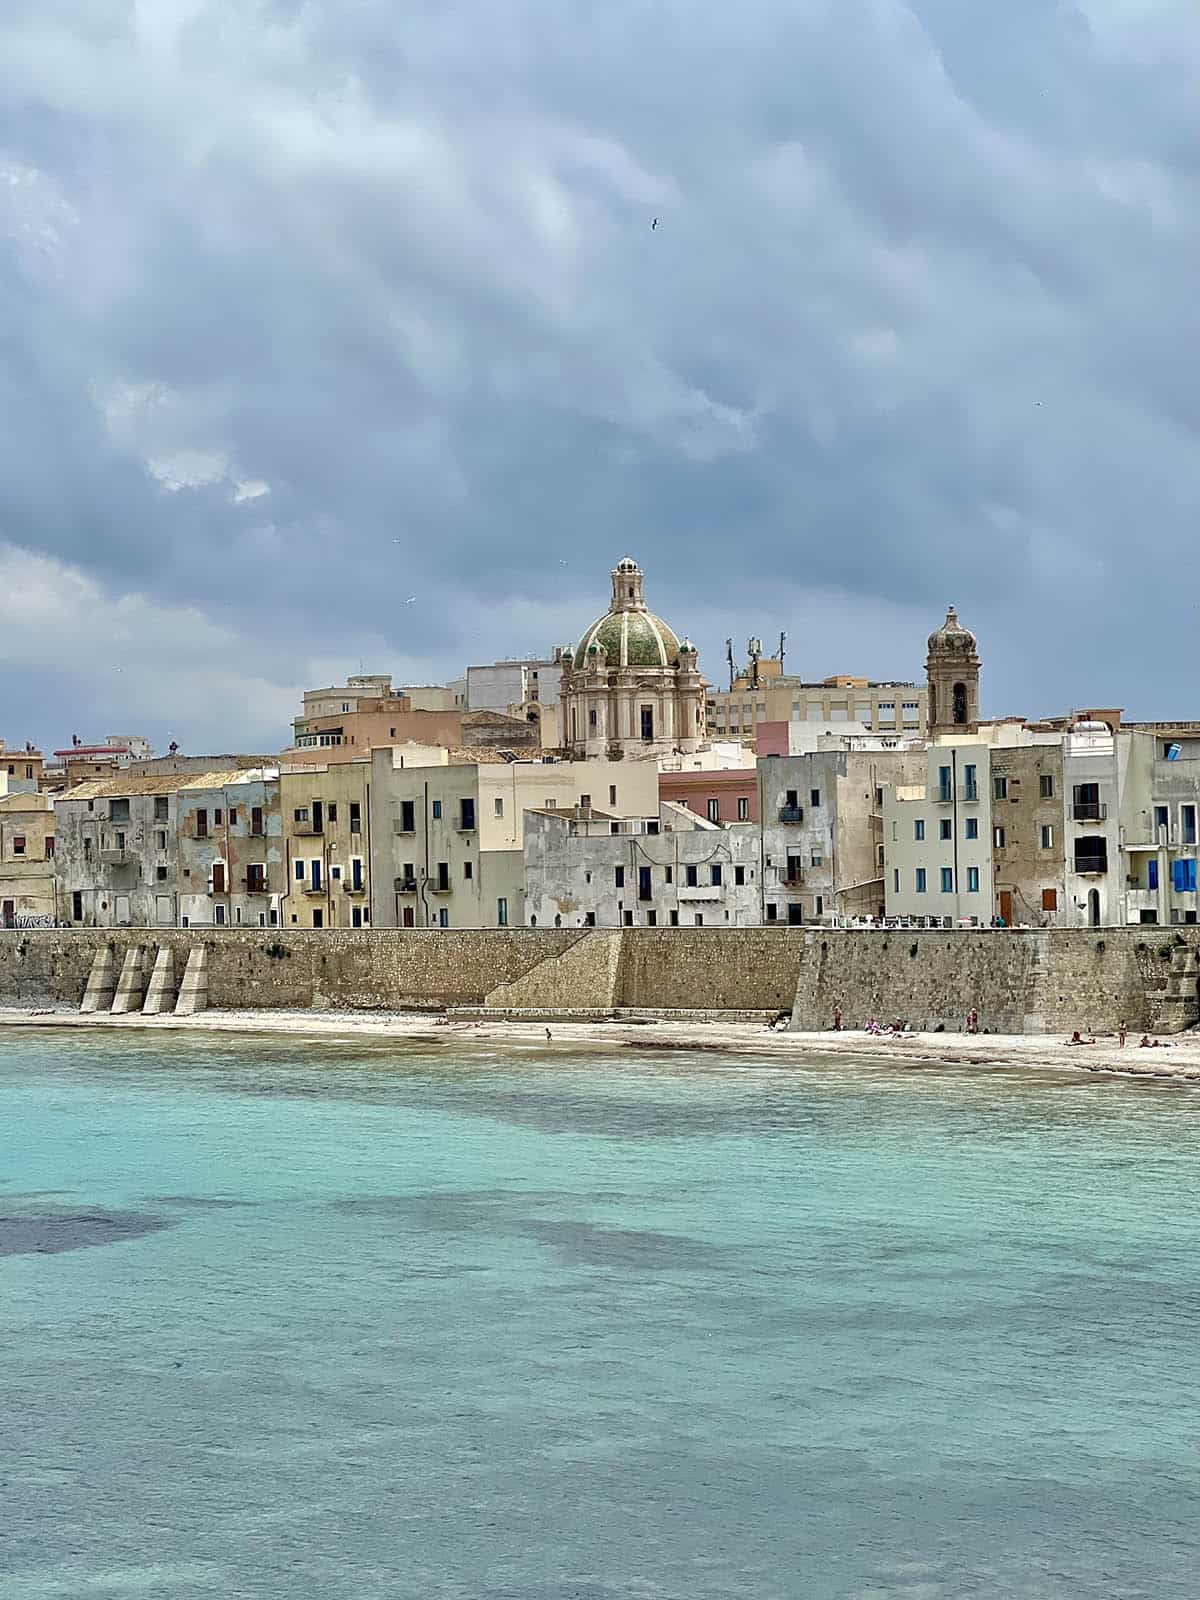 An image of an oceanside view of Trapani in Sicily